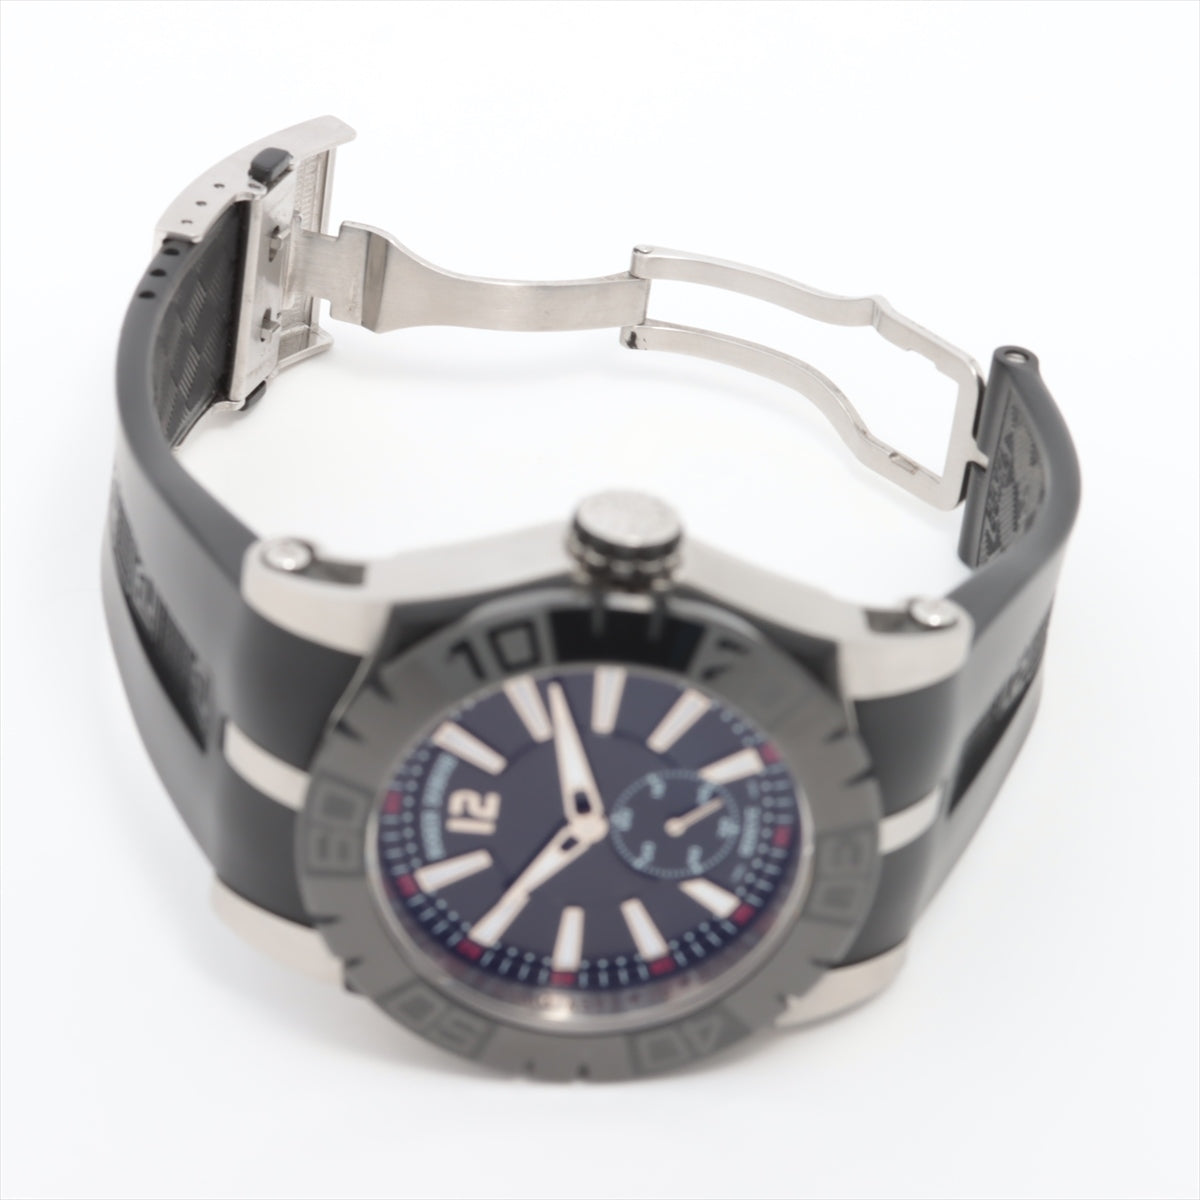 Roger Dubuis Easy Diver DBSE0280 SS & rubber AT Black-Face